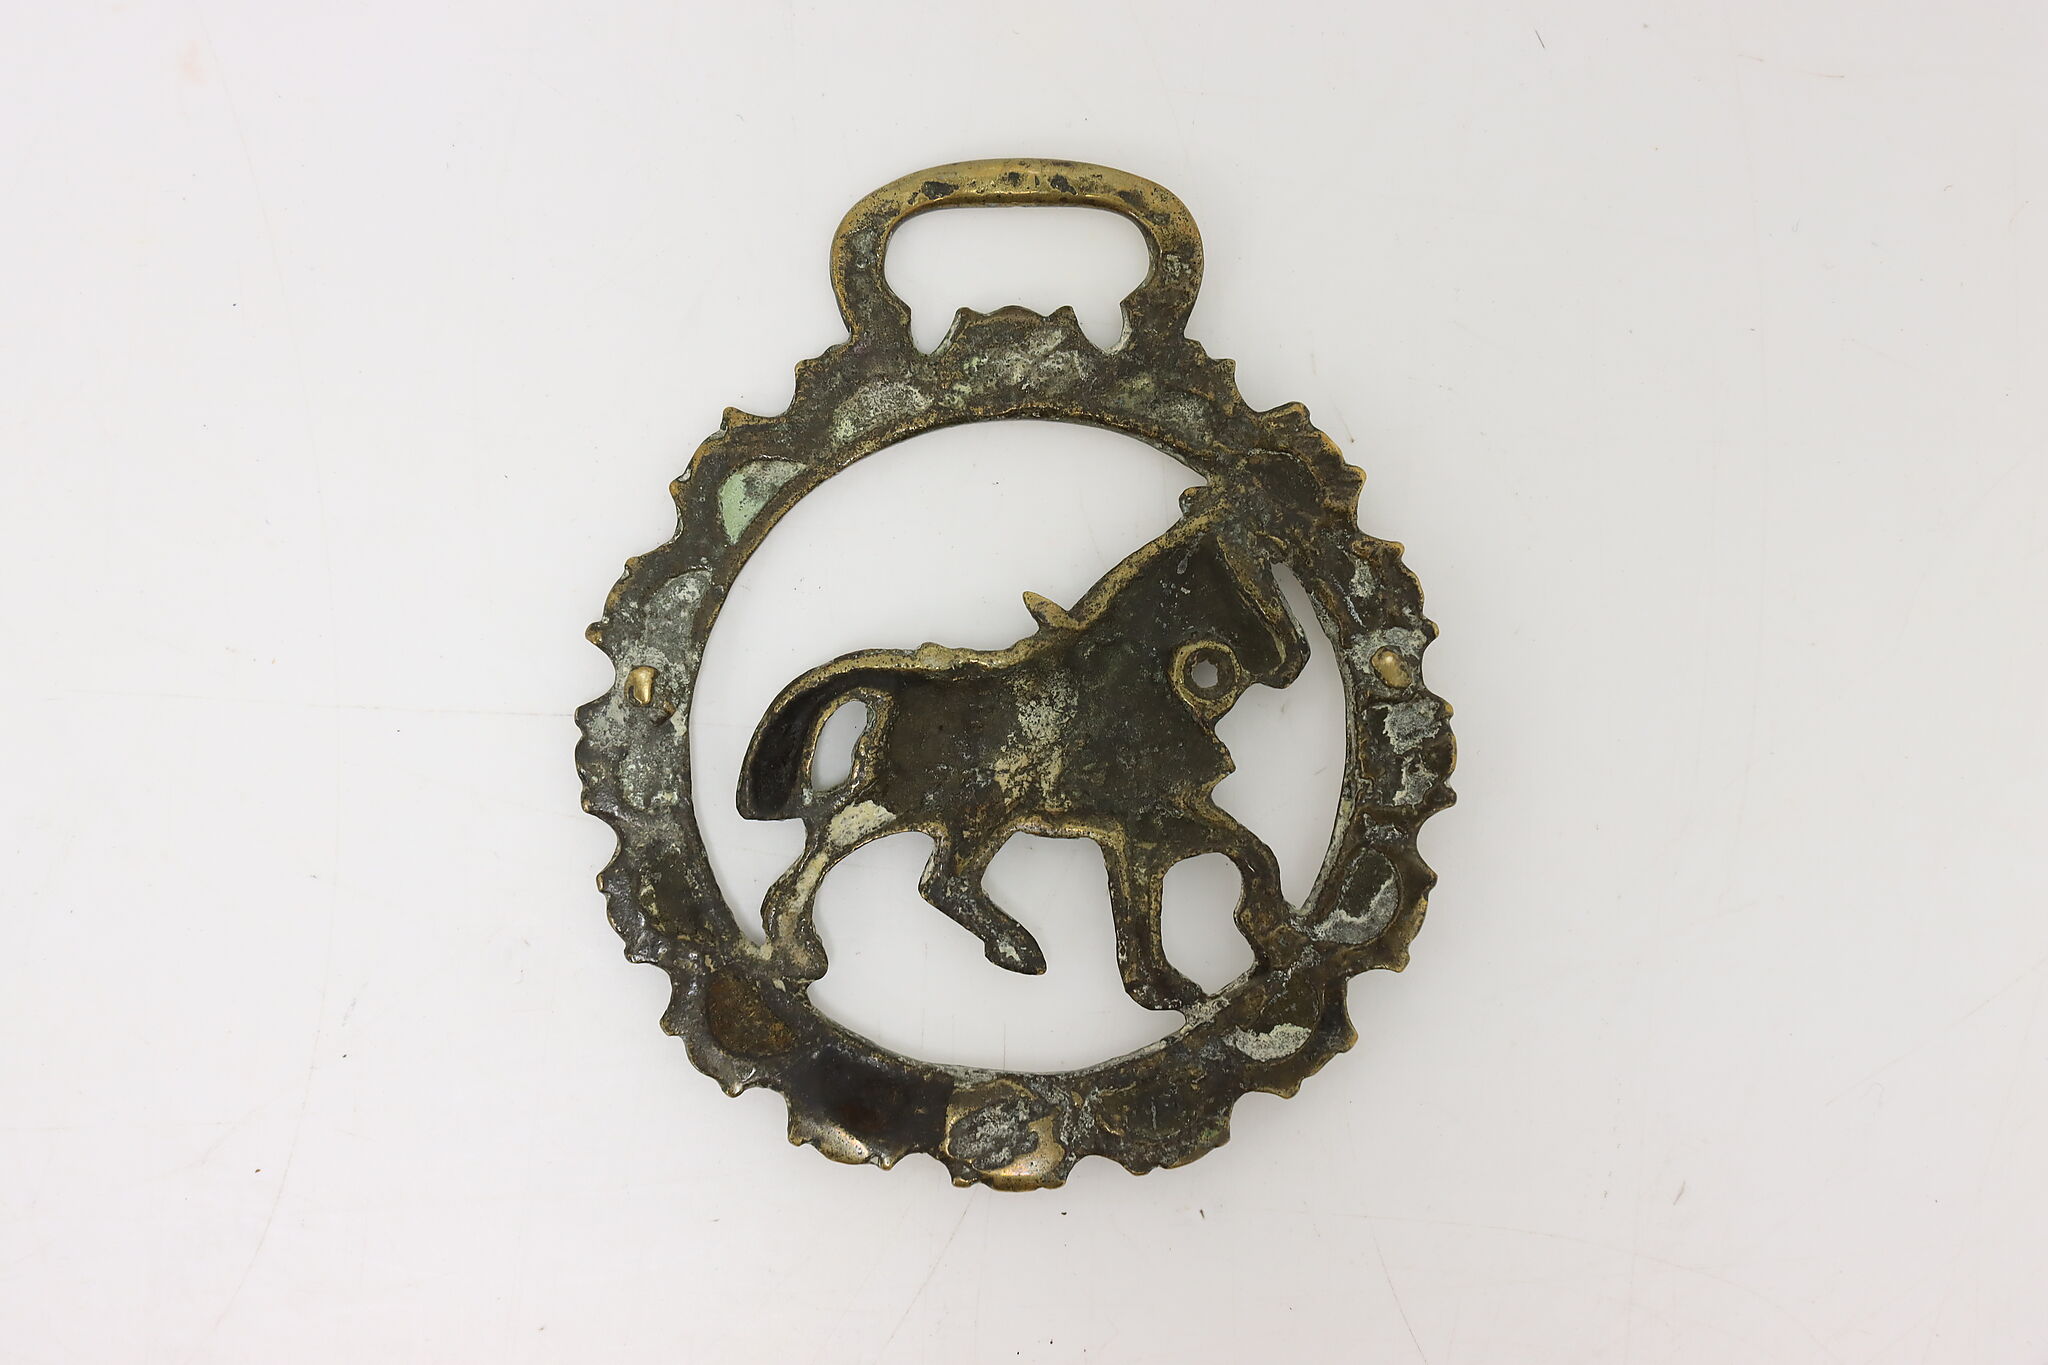 Vintage Shire Horse Horse Brass Martingale Horse Harness Ornament Medallion  Decoration -  Canada